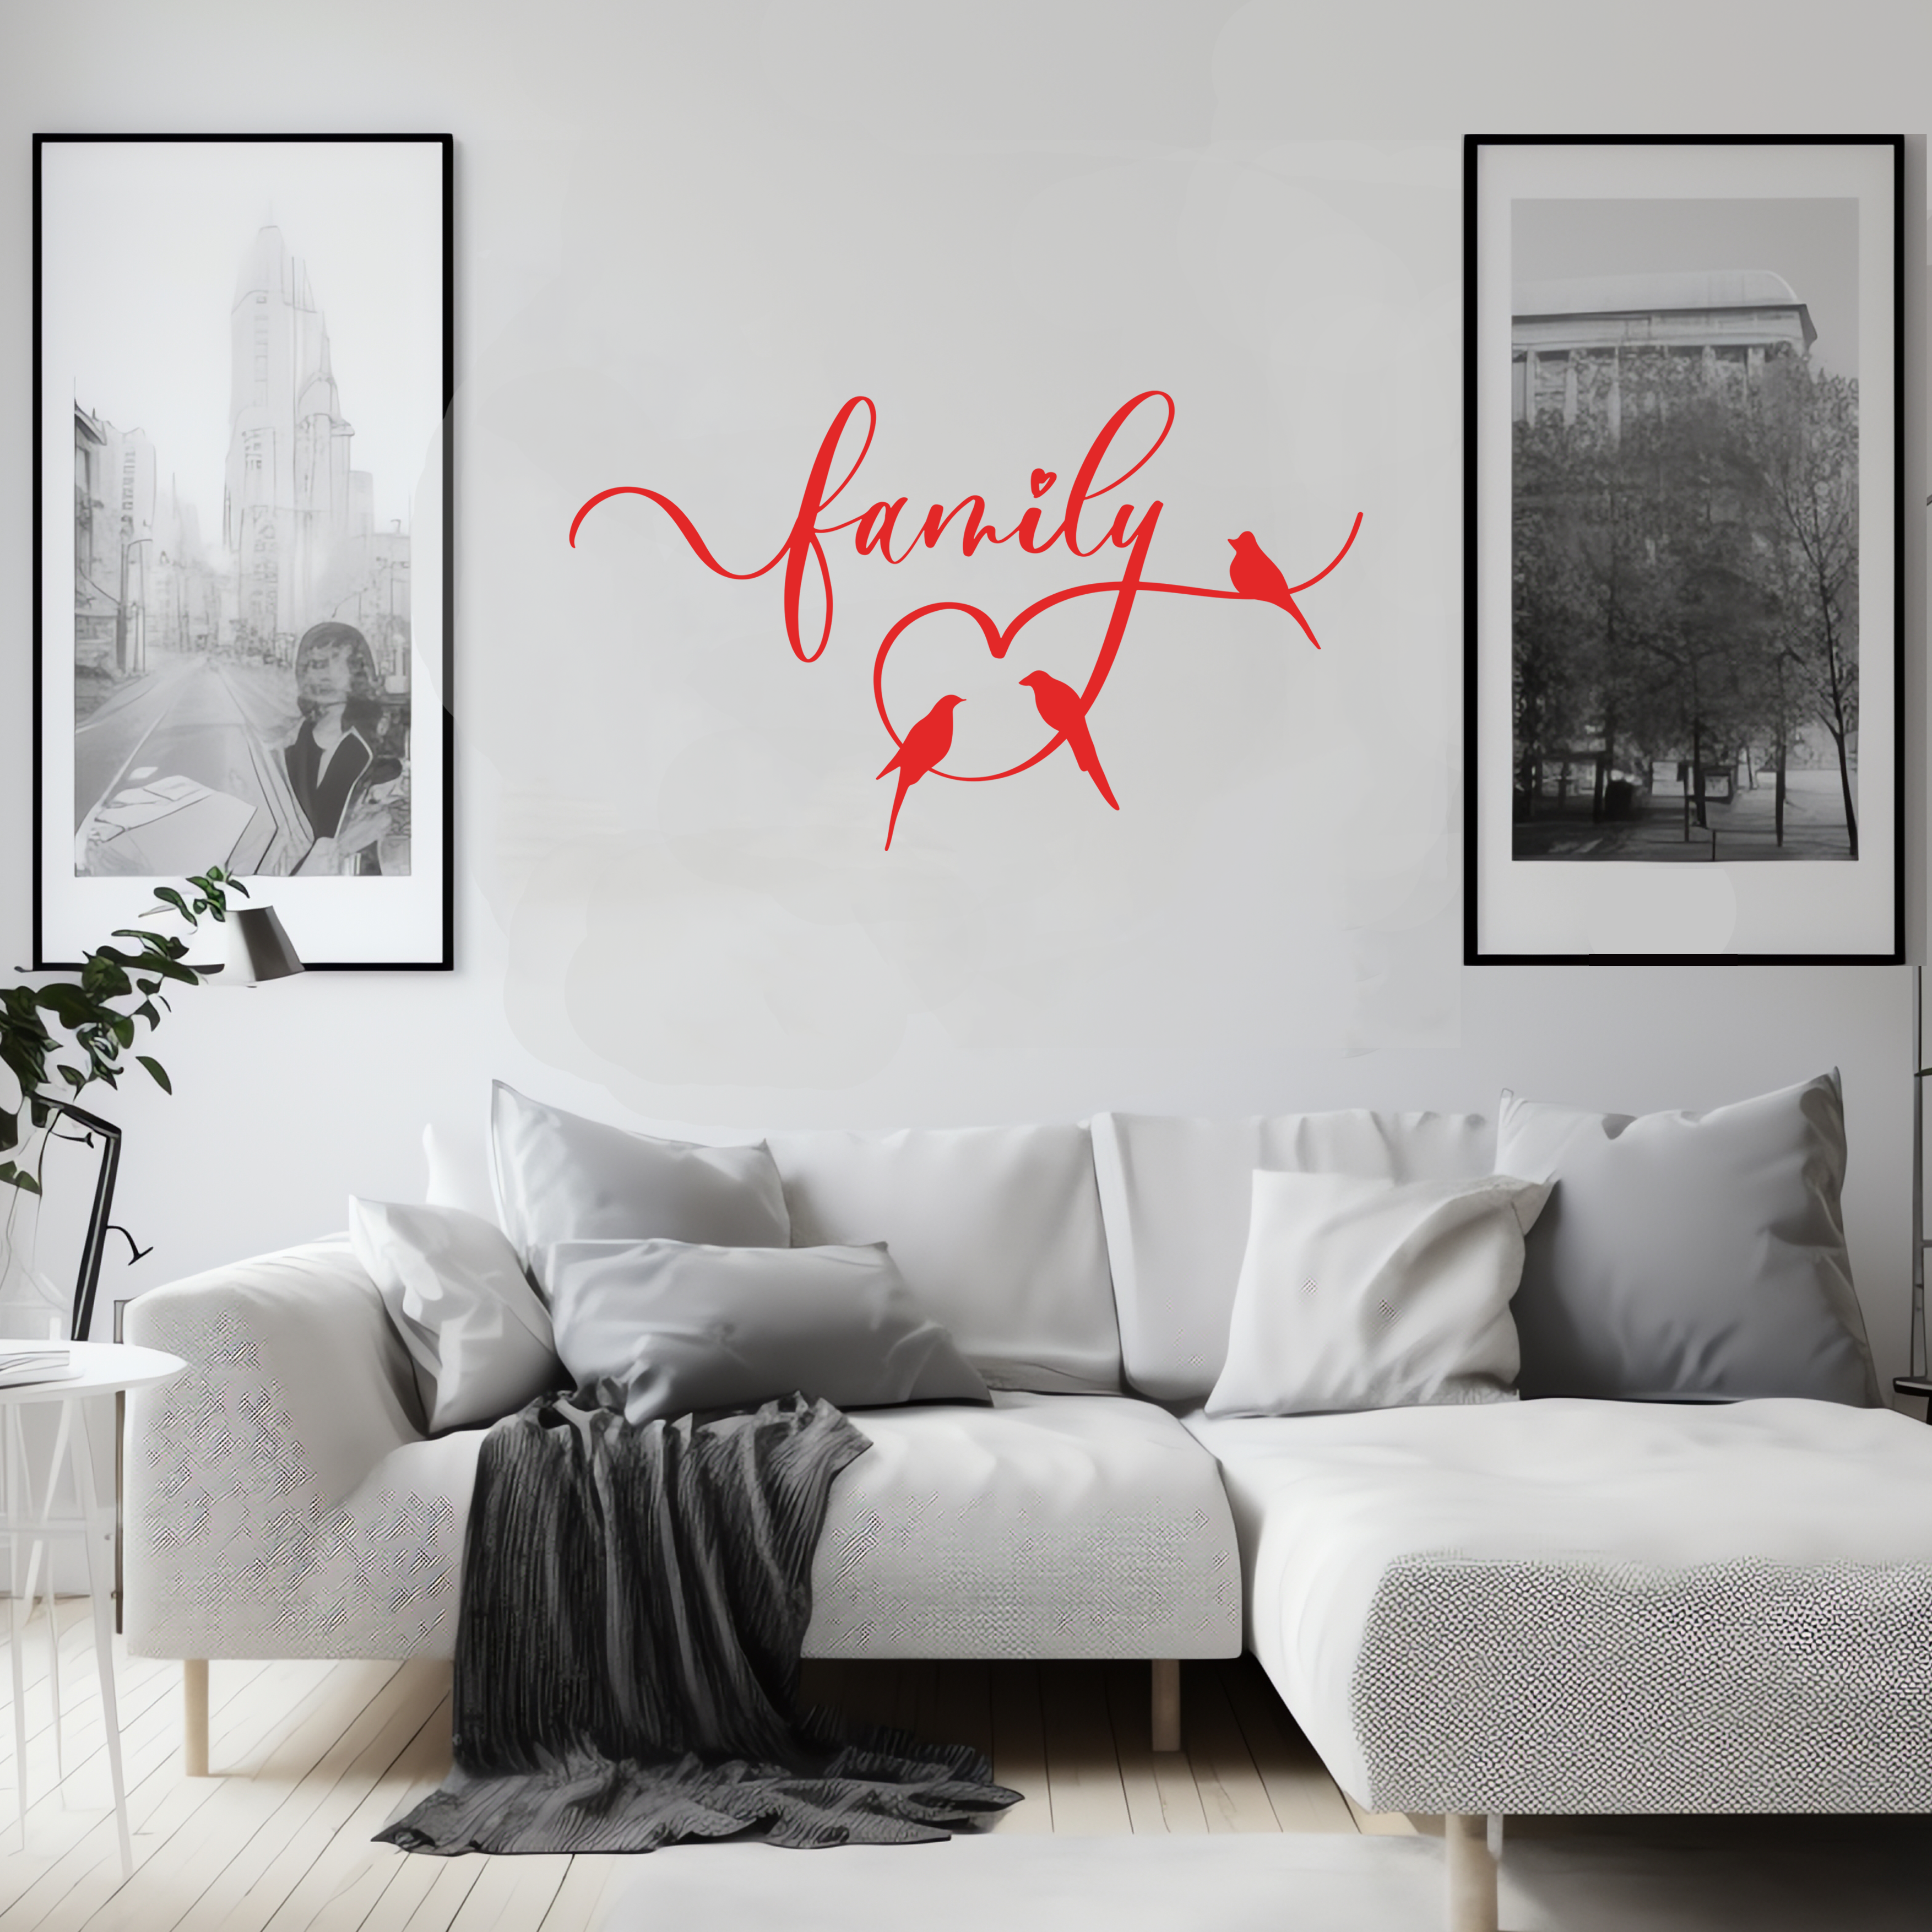 Family Wall Sticker Decal